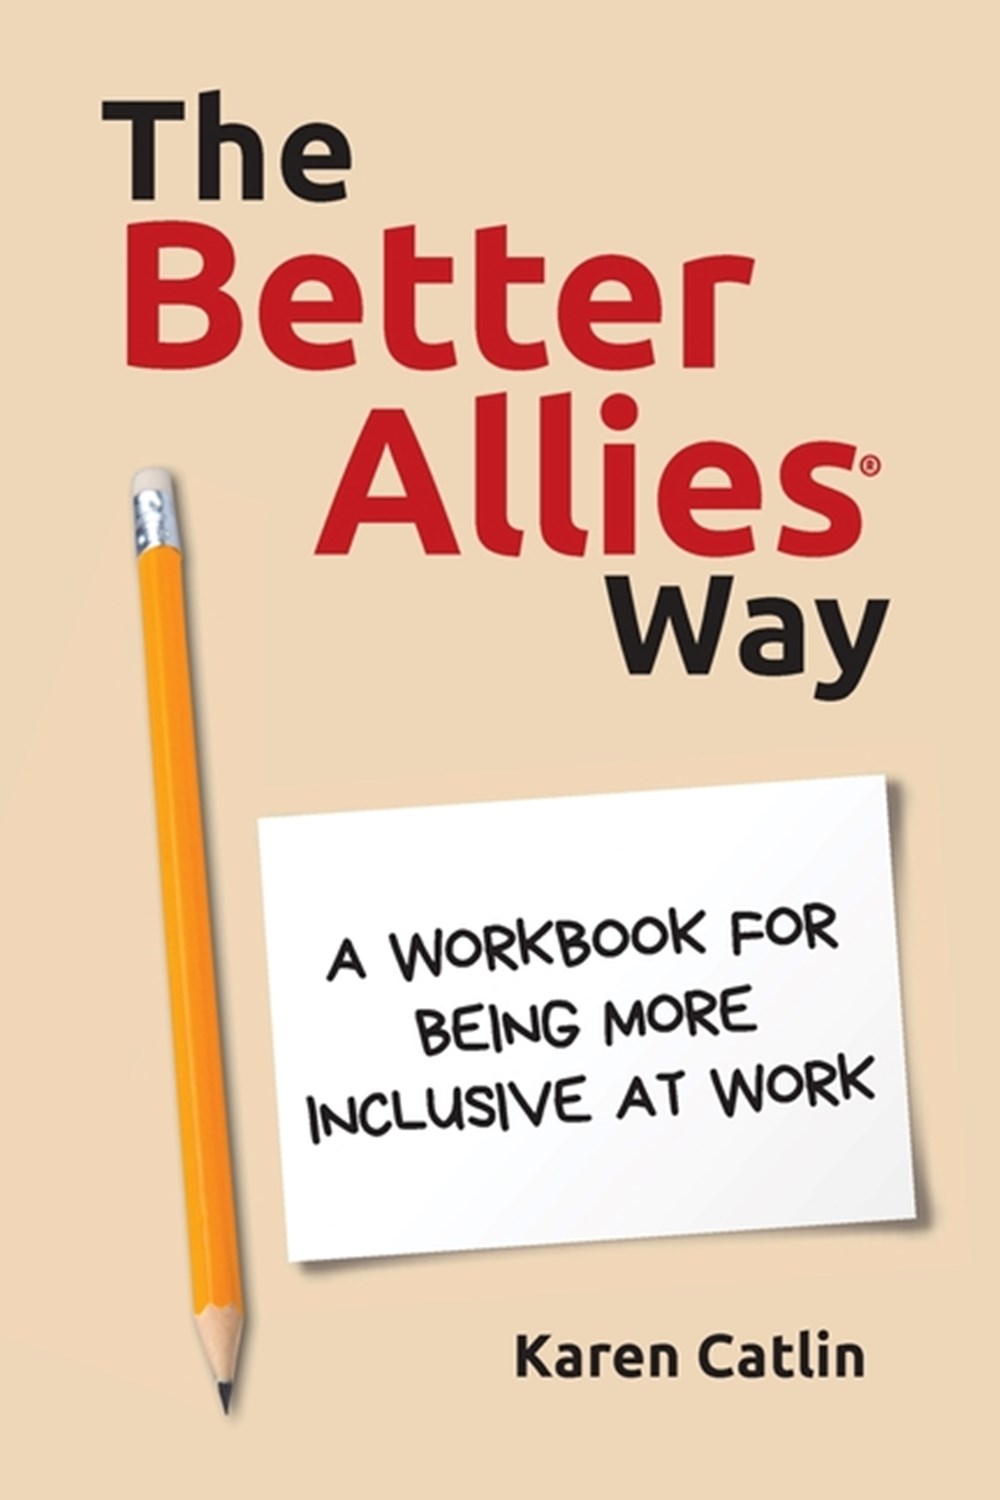 Better Allies Way: A Workbook for Being More Inclusive at Work